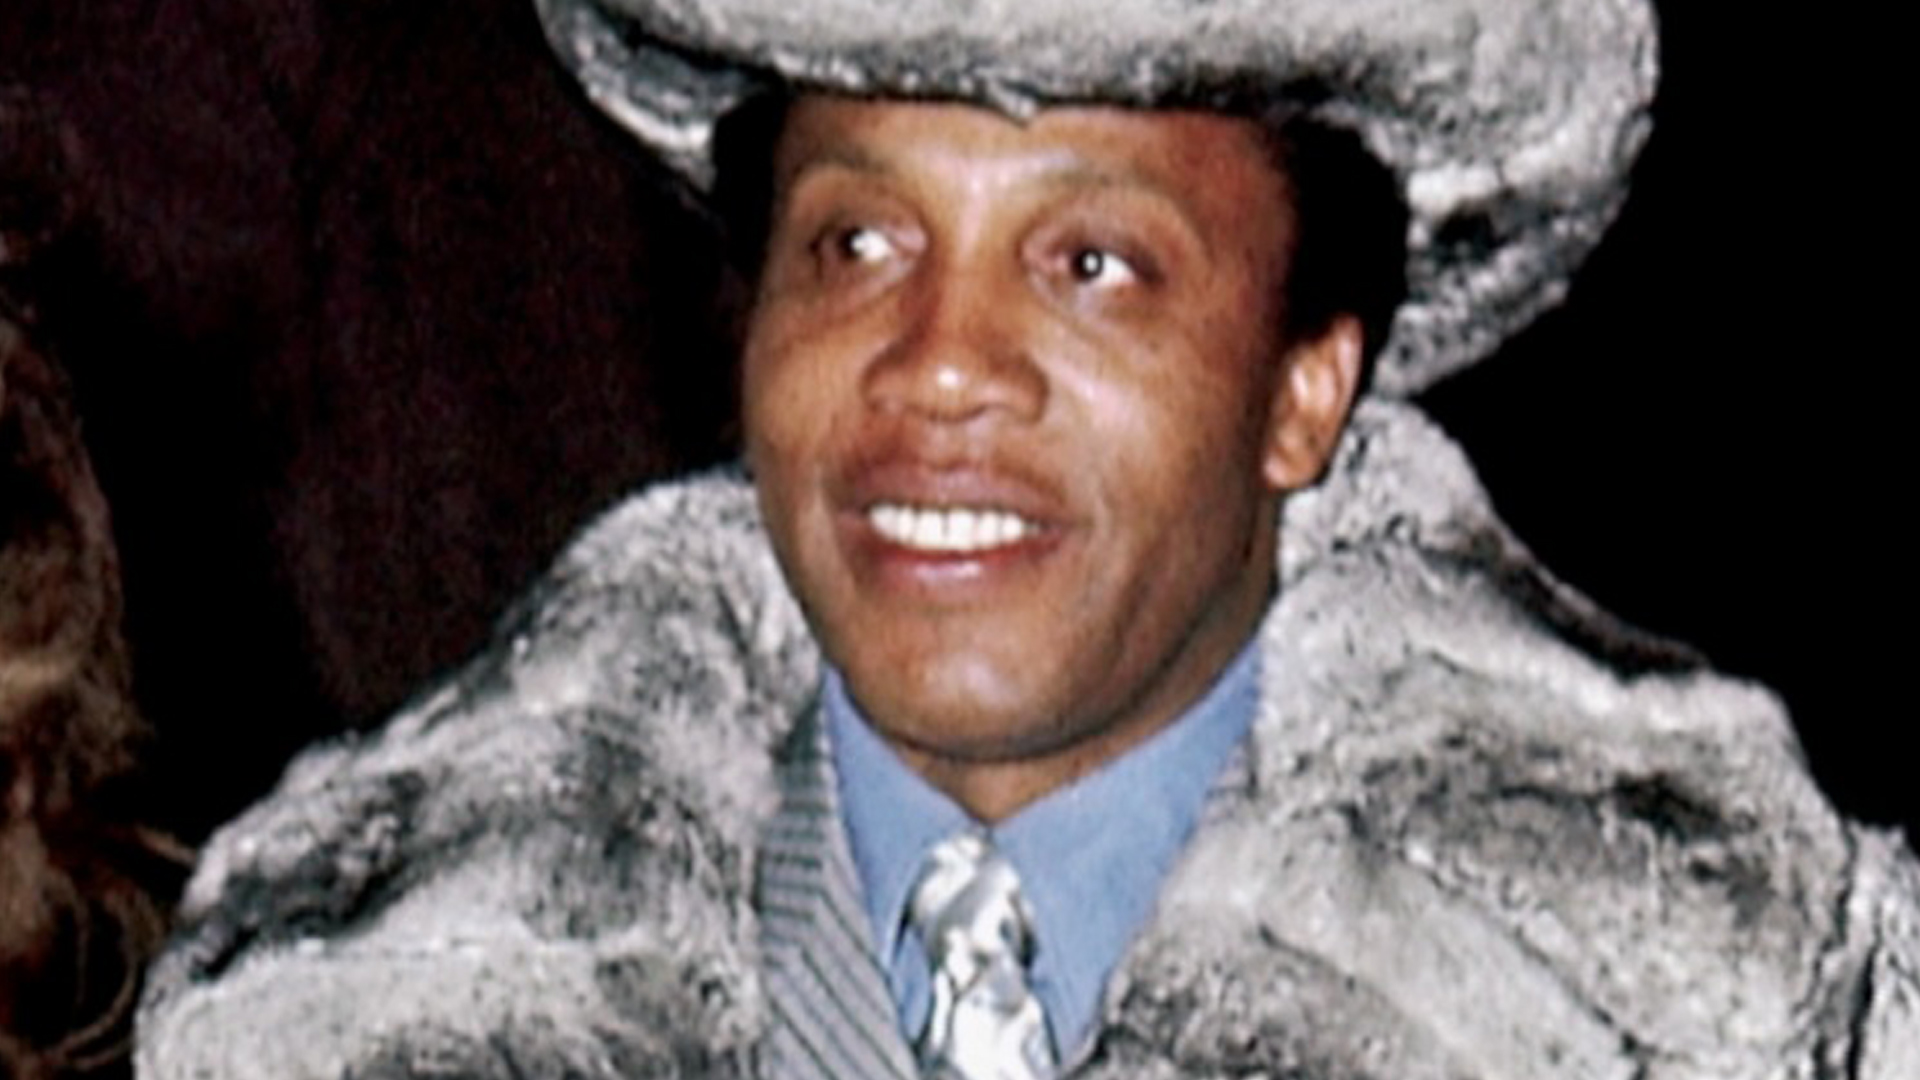 Godfather Of Harlem Frank Lucas Bumpy Johnson And The True Story Behind Godfather Of Harlem 2020 01 27